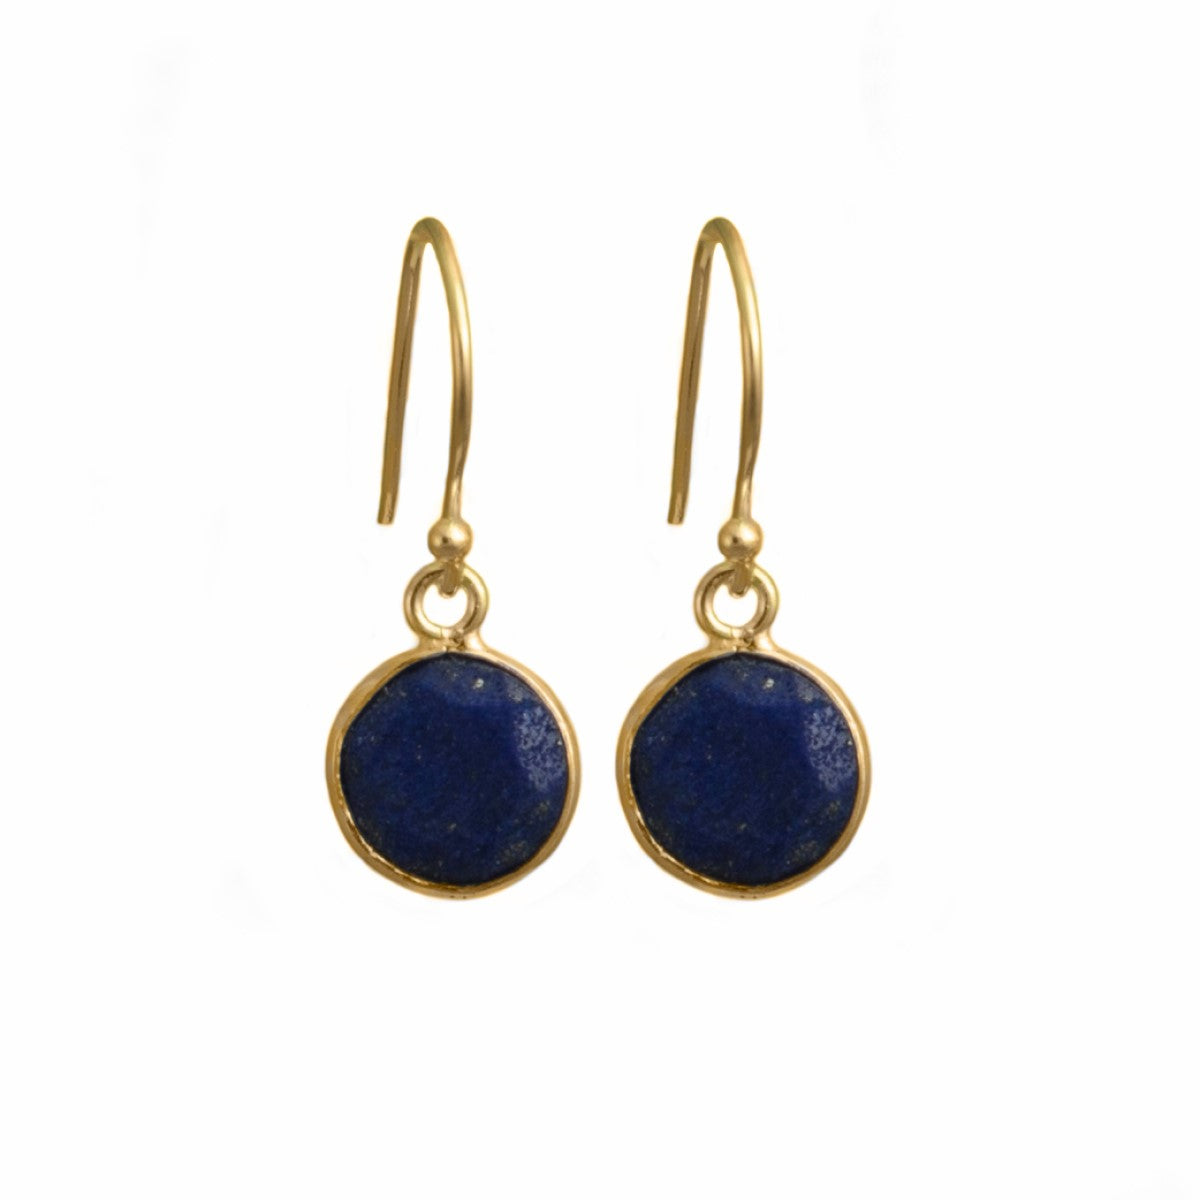 Lapis Lazuli Gold Plated Sterling Silver Earrings with a Round Faceted Gemstone Drop